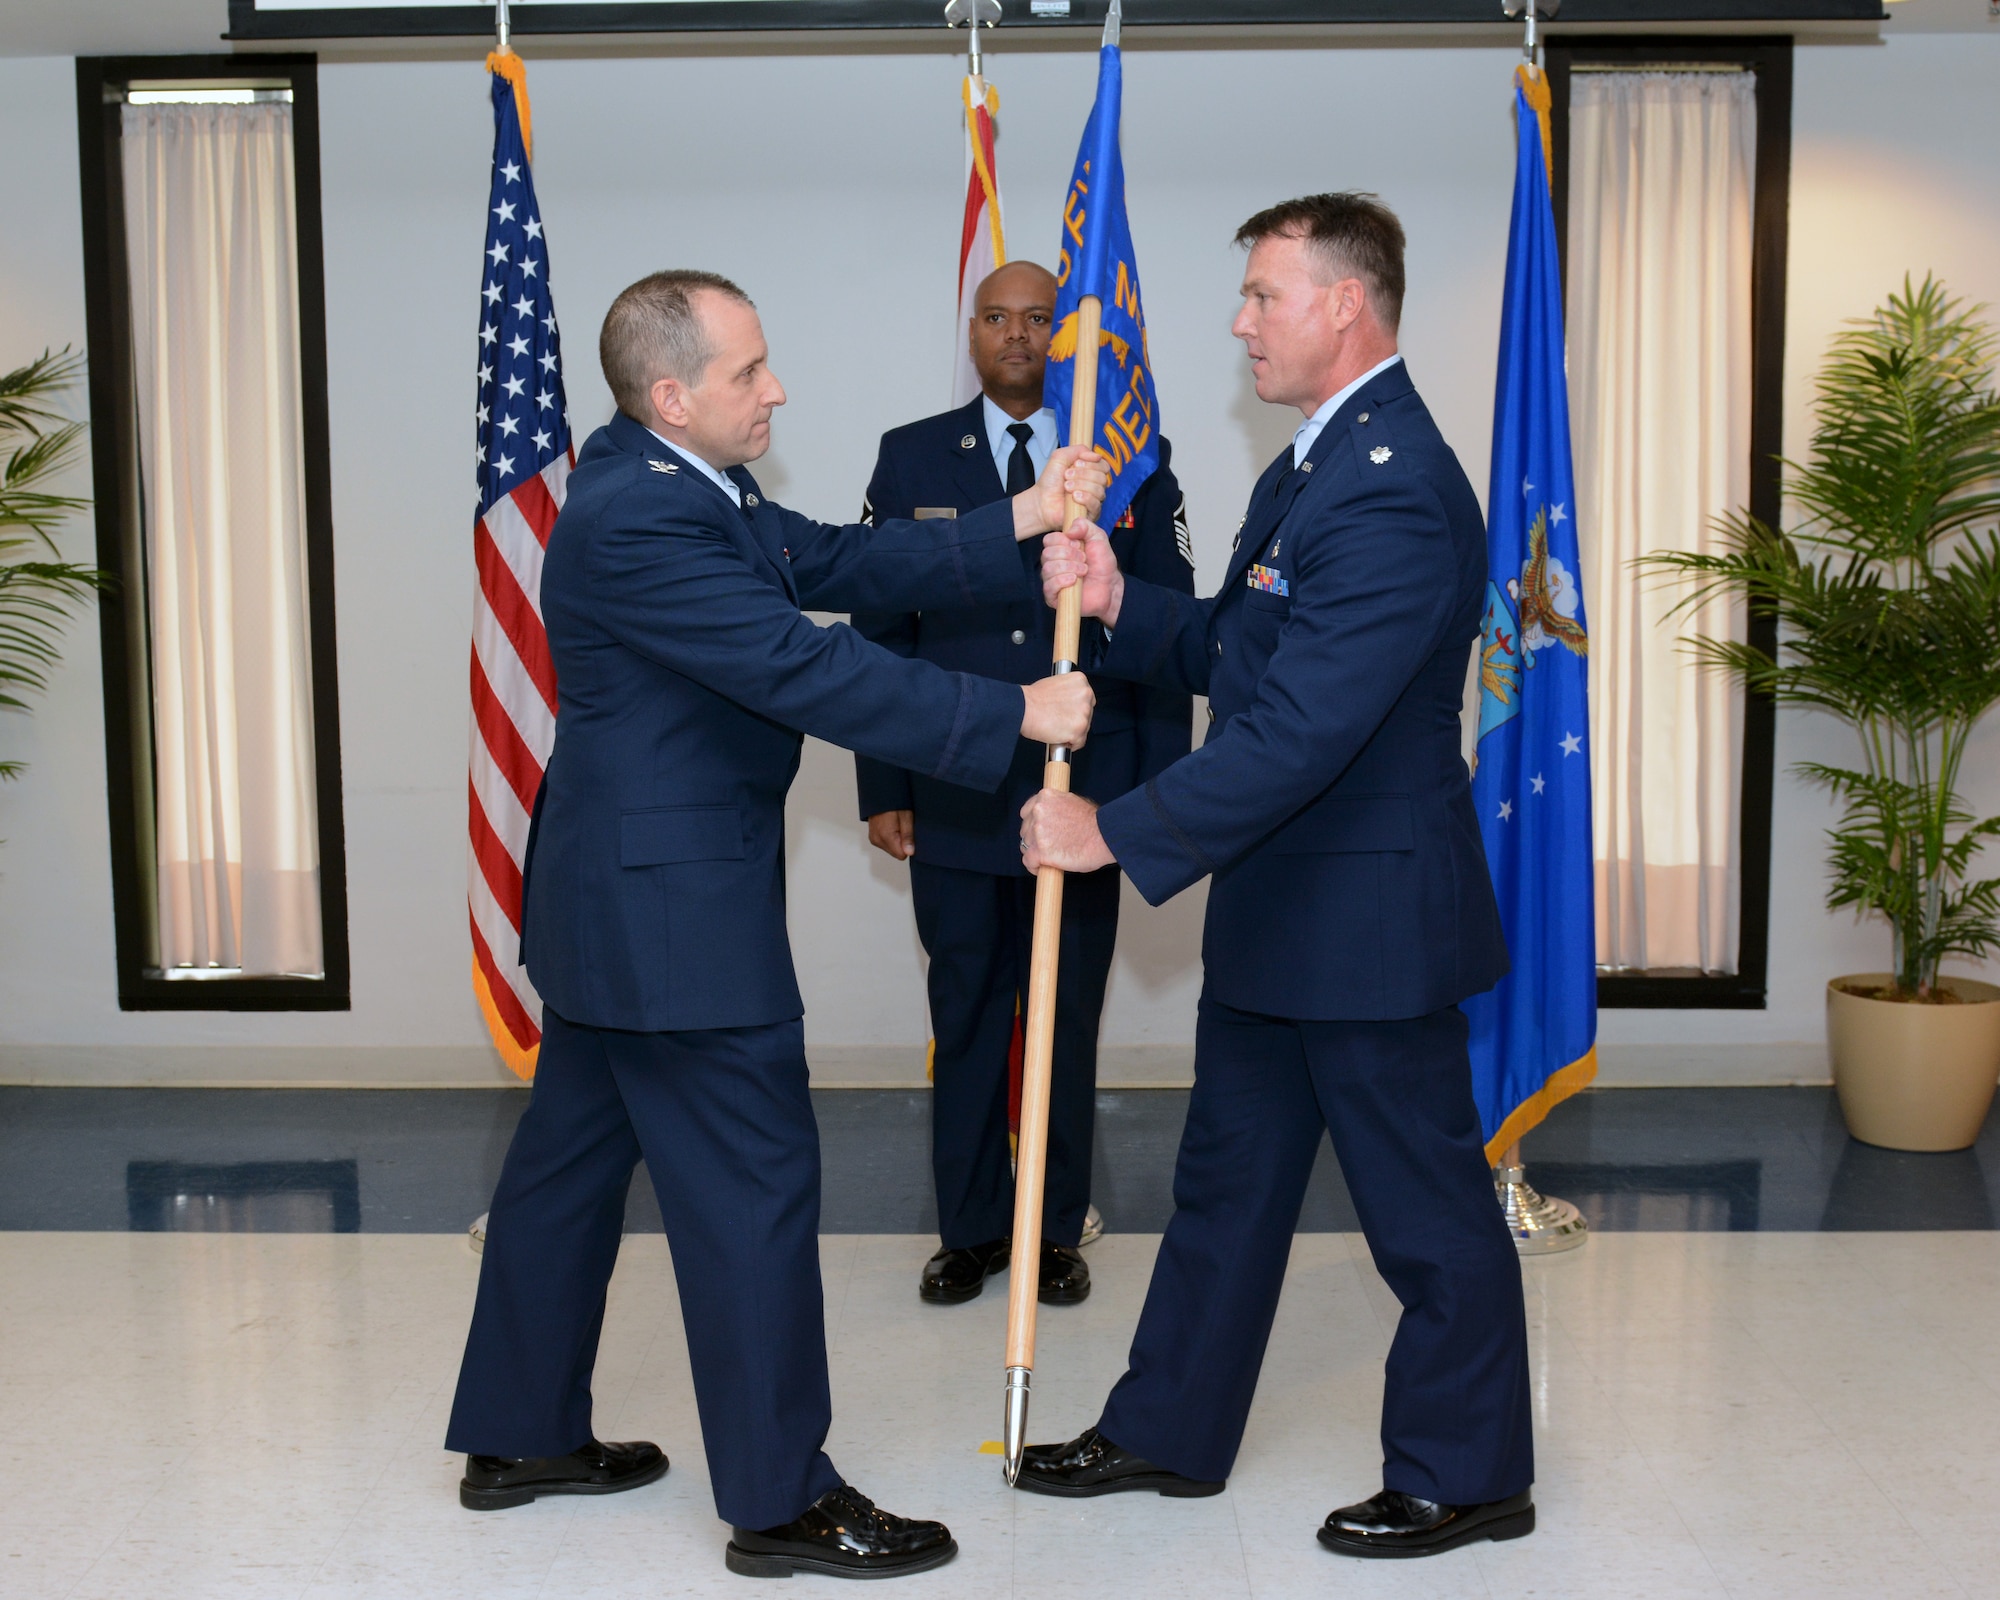 U.S. Air Force Lt. Col. Steven Edwards assumed command of the 125th Medical Detachment 1 at the 125th Fighter Wing in Jacksonville, Fla., on November 06, 2016. (U.S. Air National Guard photo by Tech. Sgt. Troy Anderson/Released)